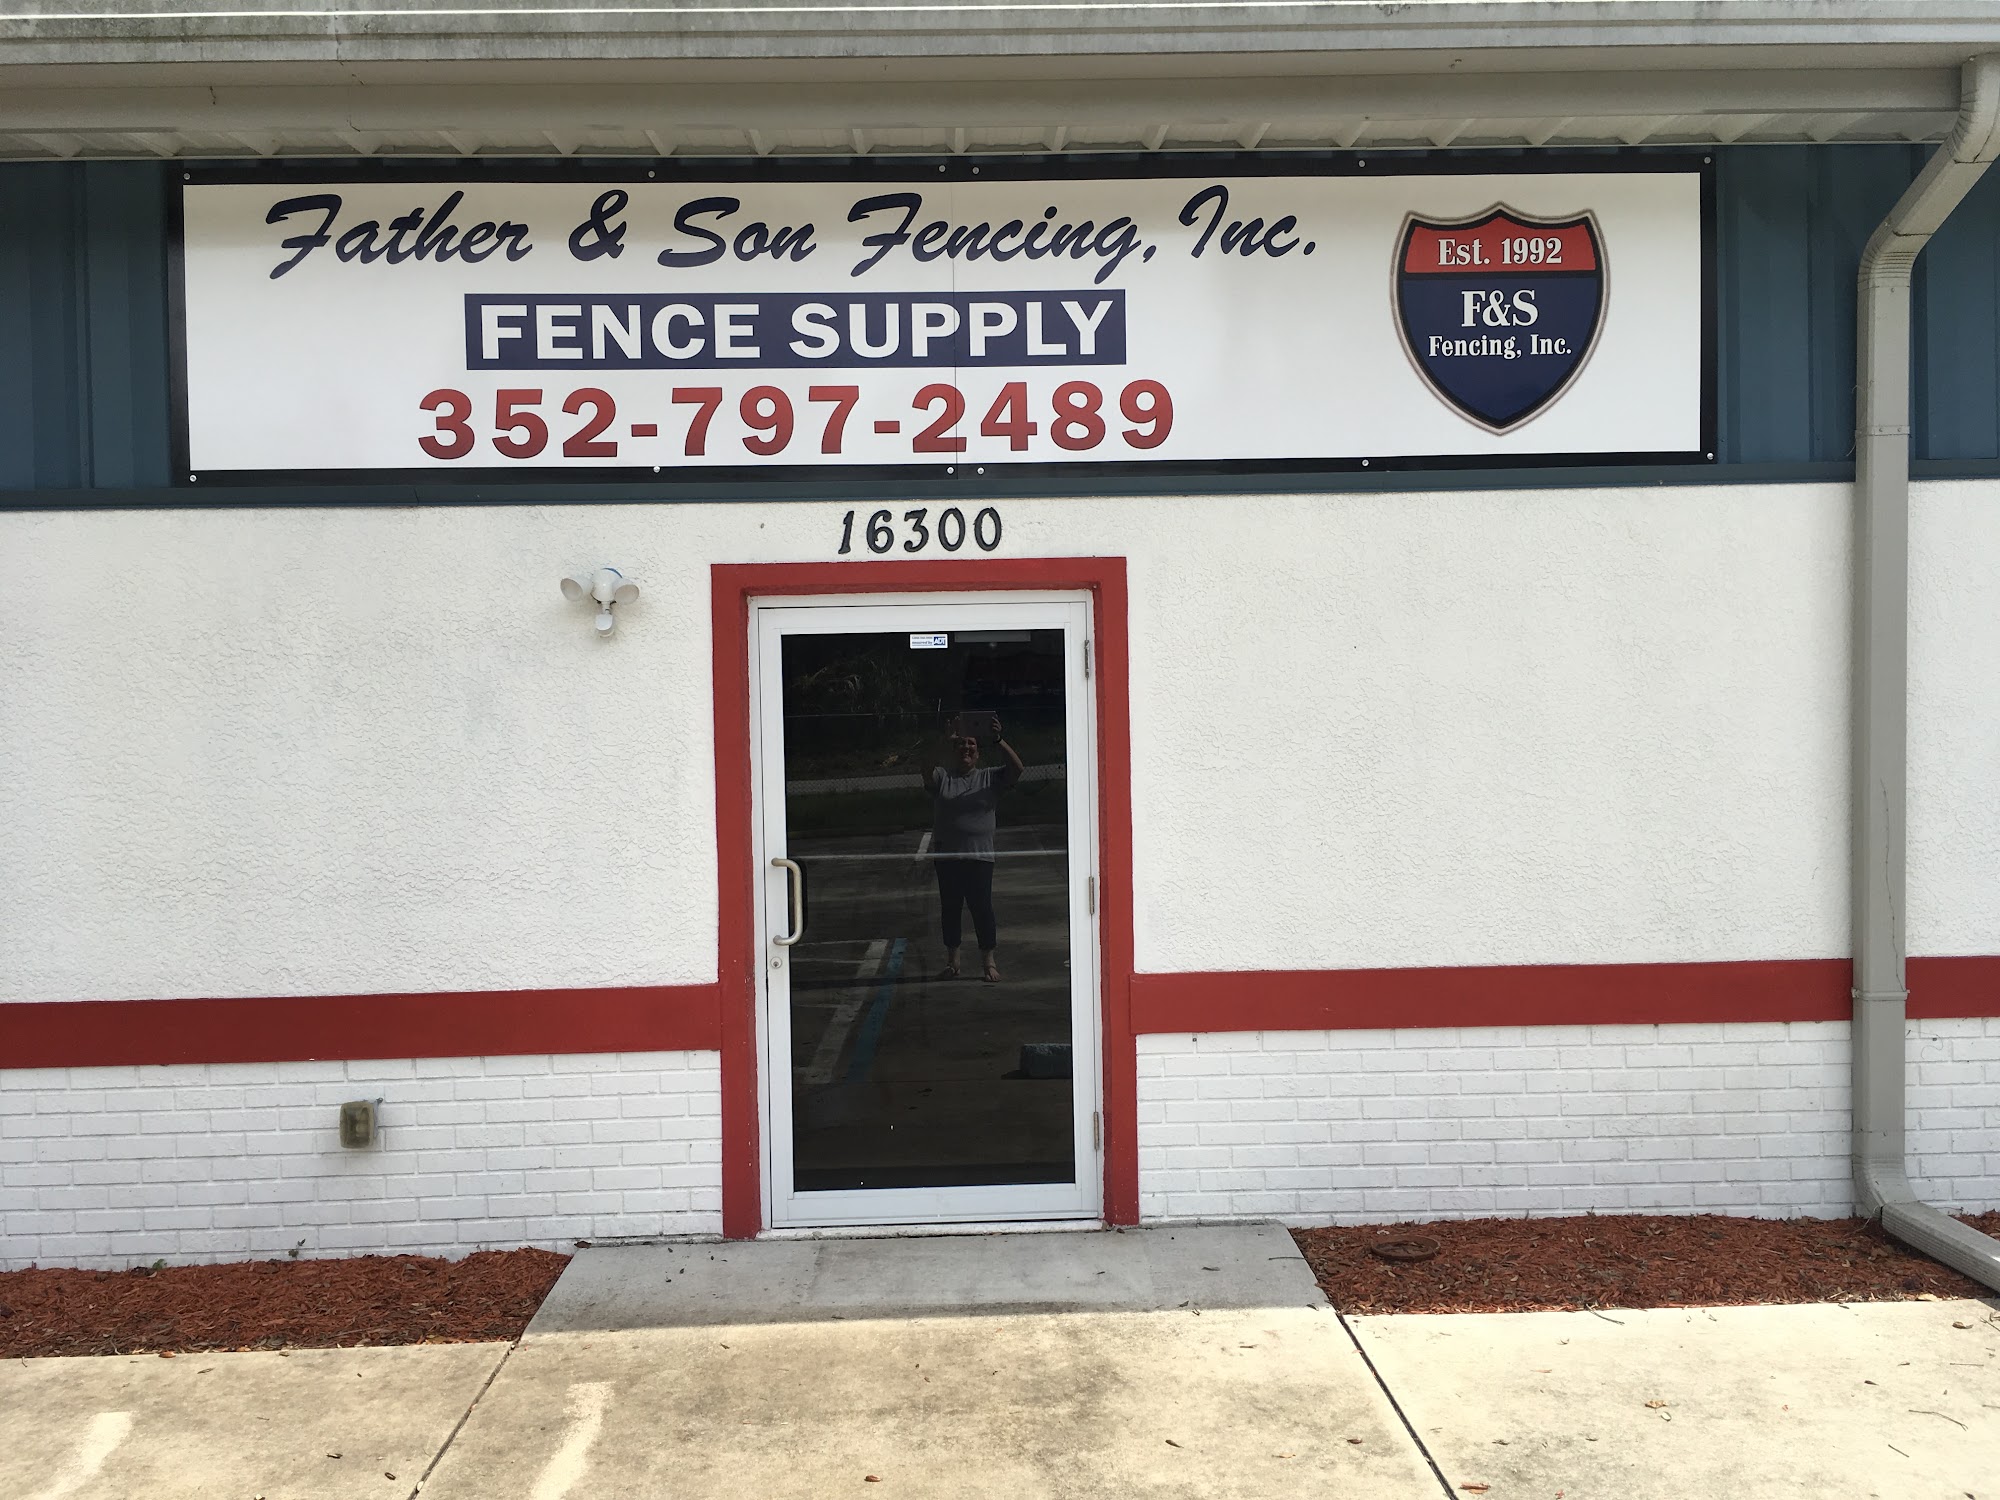 Father & Son Fence Supply